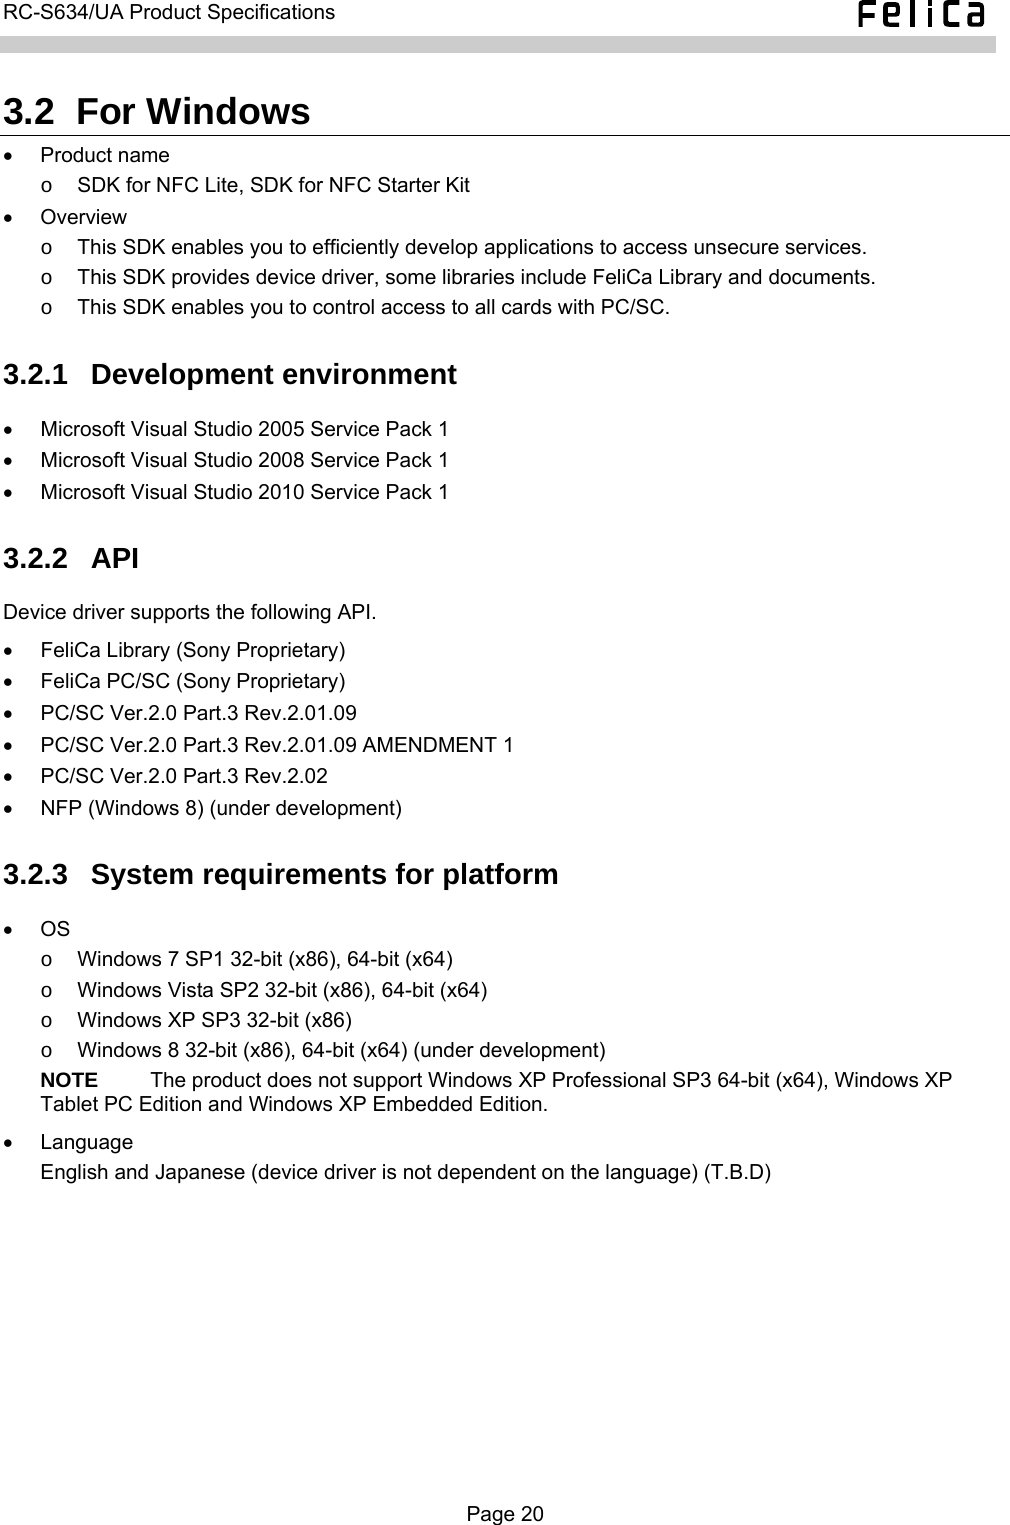   RC-S634/UA Product Specifications  3.2  For Windows • Product name o  SDK for NFC Lite, SDK for NFC Starter Kit • Overview  o  This SDK enables you to efficiently develop applications to access unsecure services. o  This SDK provides device driver, some libraries include FeliCa Library and documents. o  This SDK enables you to control access to all cards with PC/SC. 3.2.1  Development environment •  Microsoft Visual Studio 2005 Service Pack 1 •  Microsoft Visual Studio 2008 Service Pack 1 •  Microsoft Visual Studio 2010 Service Pack 1 3.2.2  API Device driver supports the following API. •  FeliCa Library (Sony Proprietary) •  FeliCa PC/SC (Sony Proprietary) •  PC/SC Ver.2.0 Part.3 Rev.2.01.09 •  PC/SC Ver.2.0 Part.3 Rev.2.01.09 AMENDMENT 1 •  PC/SC Ver.2.0 Part.3 Rev.2.02 •  NFP (Windows 8) (under development) 3.2.3  System requirements for platform • OS  o  Windows 7 SP1 32-bit (x86), 64-bit (x64) o  Windows Vista SP2 32-bit (x86), 64-bit (x64) o  Windows XP SP3 32-bit (x86) o  Windows 8 32-bit (x86), 64-bit (x64) (under development) NOTE     The product does not support Windows XP Professional SP3 64-bit (x64), Windows XP Tablet PC Edition and Windows XP Embedded Edition. • Language English and Japanese (device driver is not dependent on the language) (T.B.D)  Page 20  